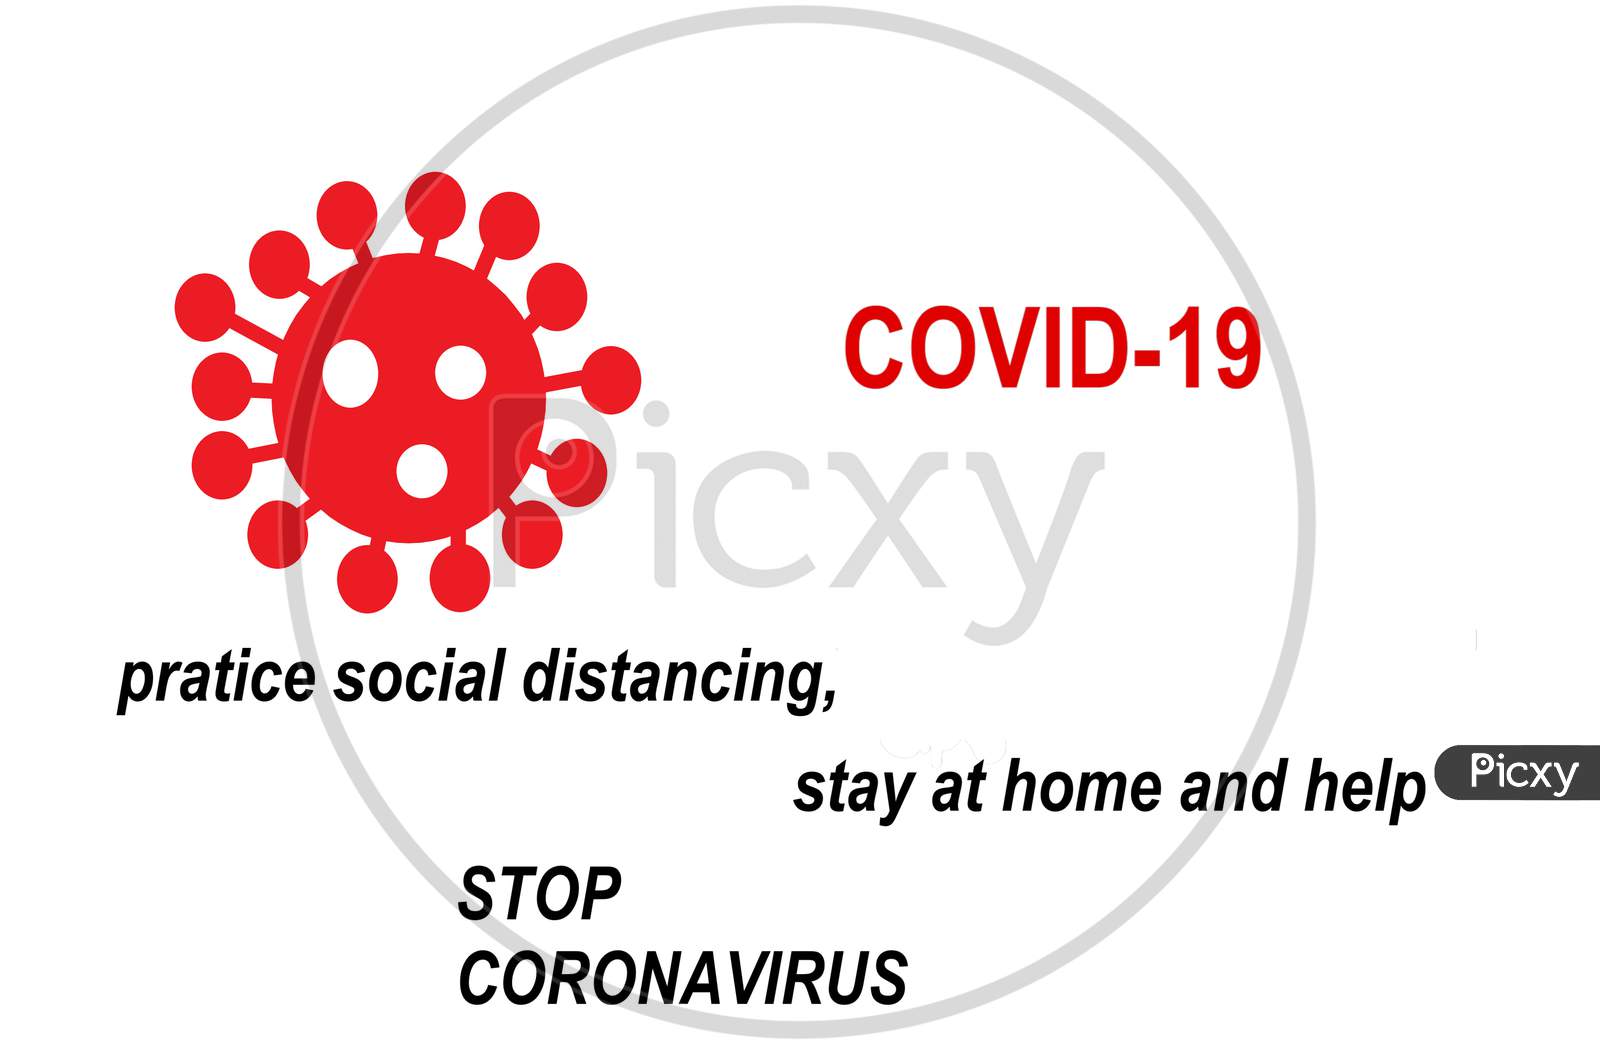 Covid 19 Sign With Message Practice Social Distancing Stay At Home and help stop coronavirous.